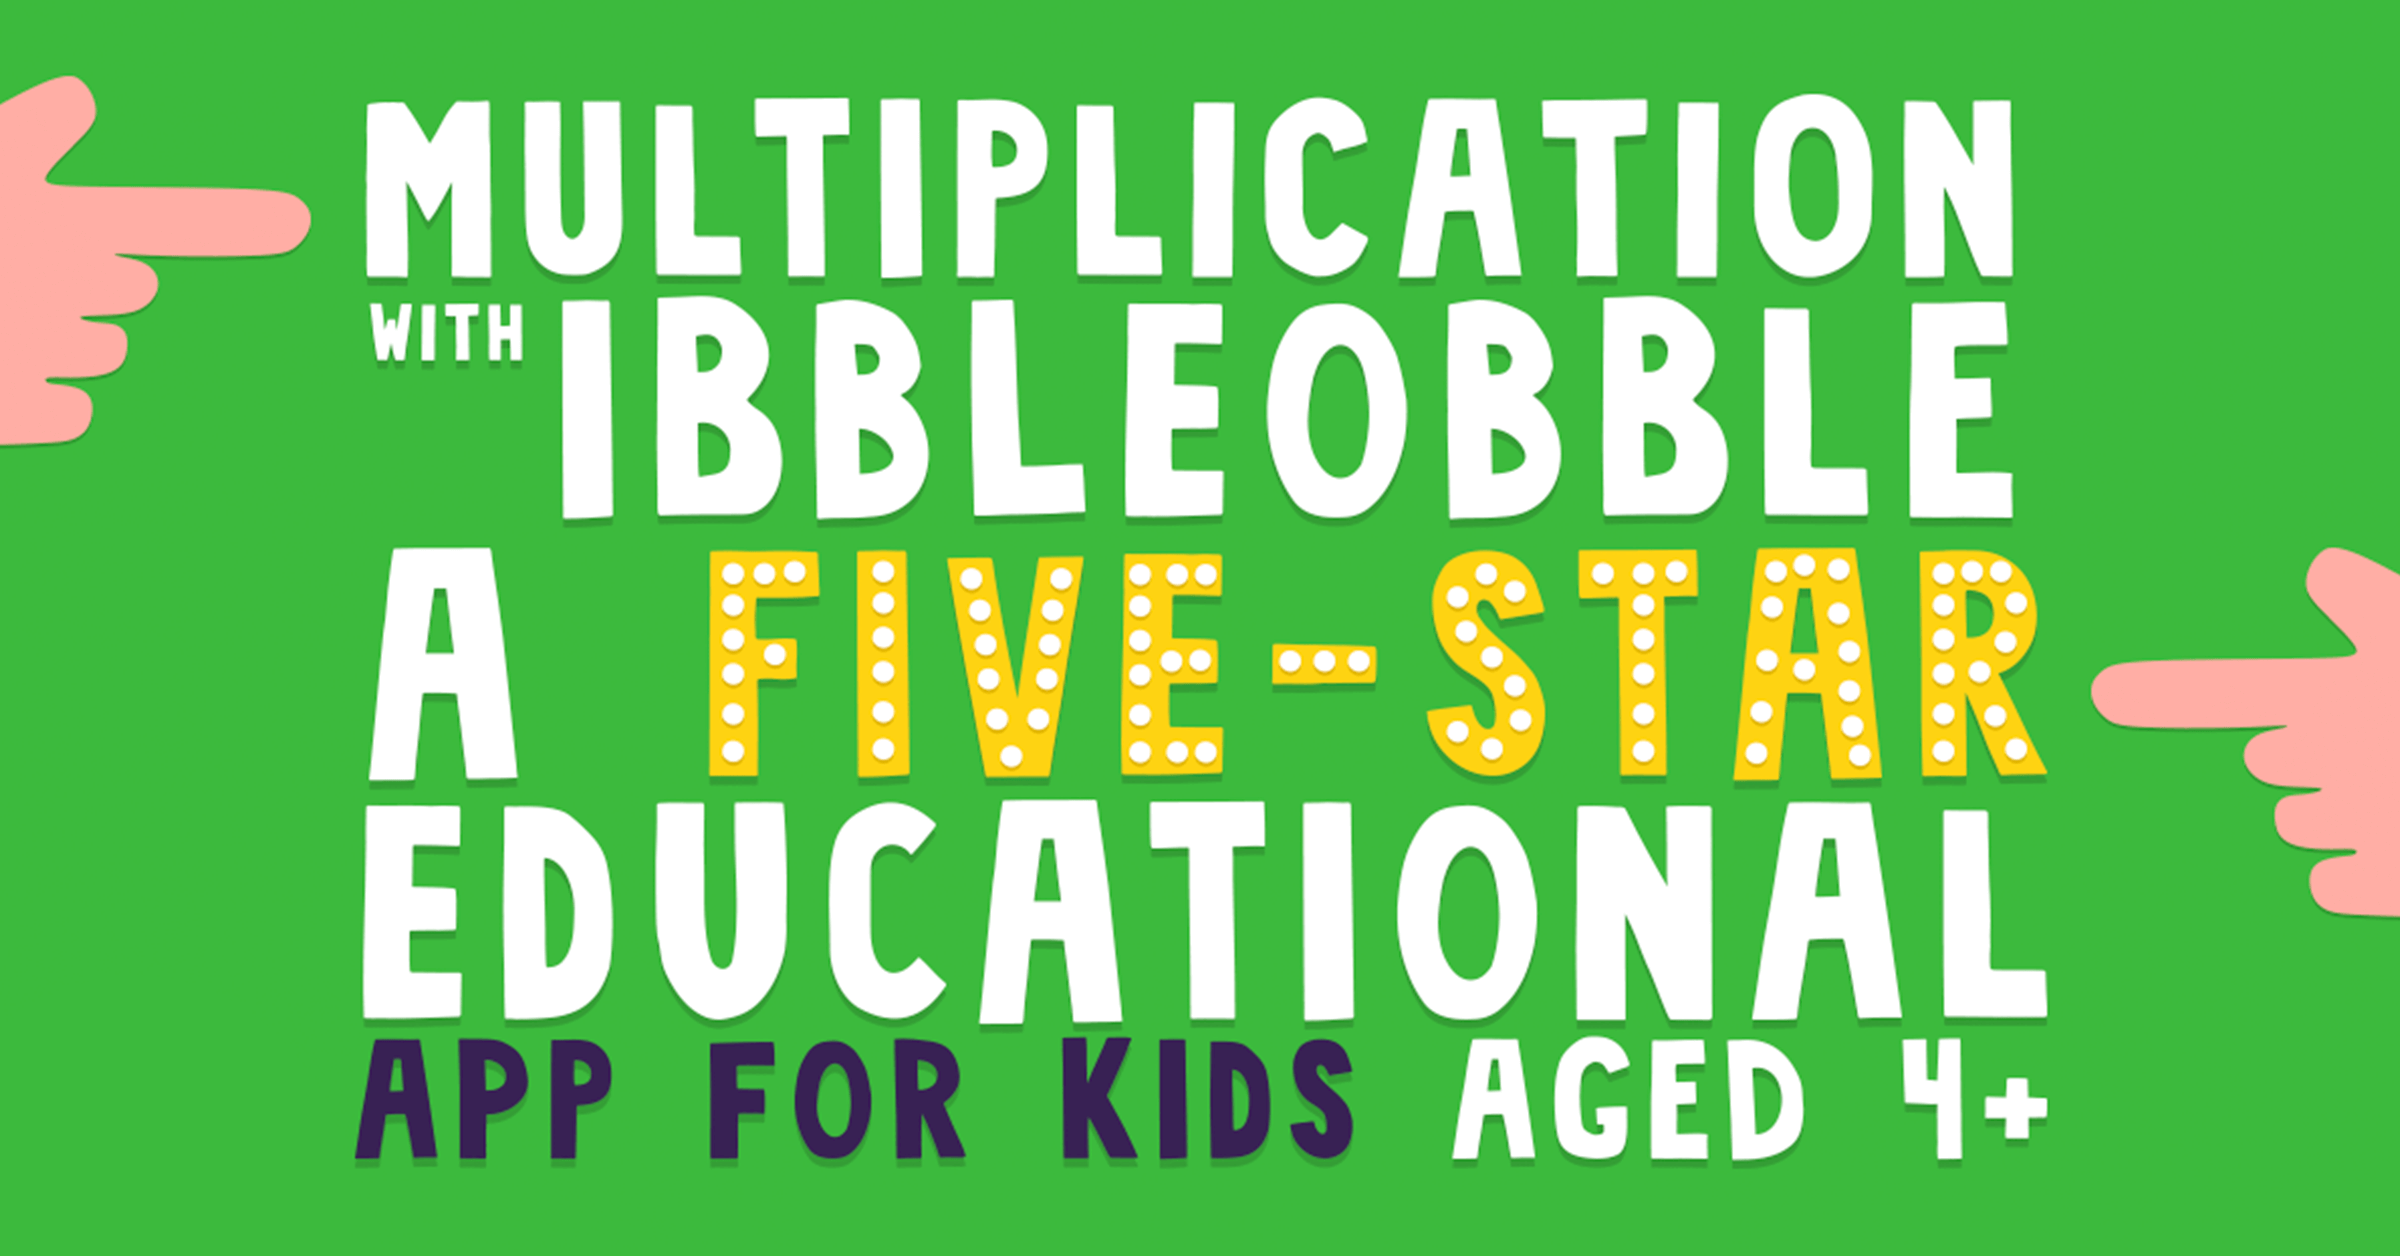 A Five-Star Educational App, Multiplication with Ibbleobble gets top marks!